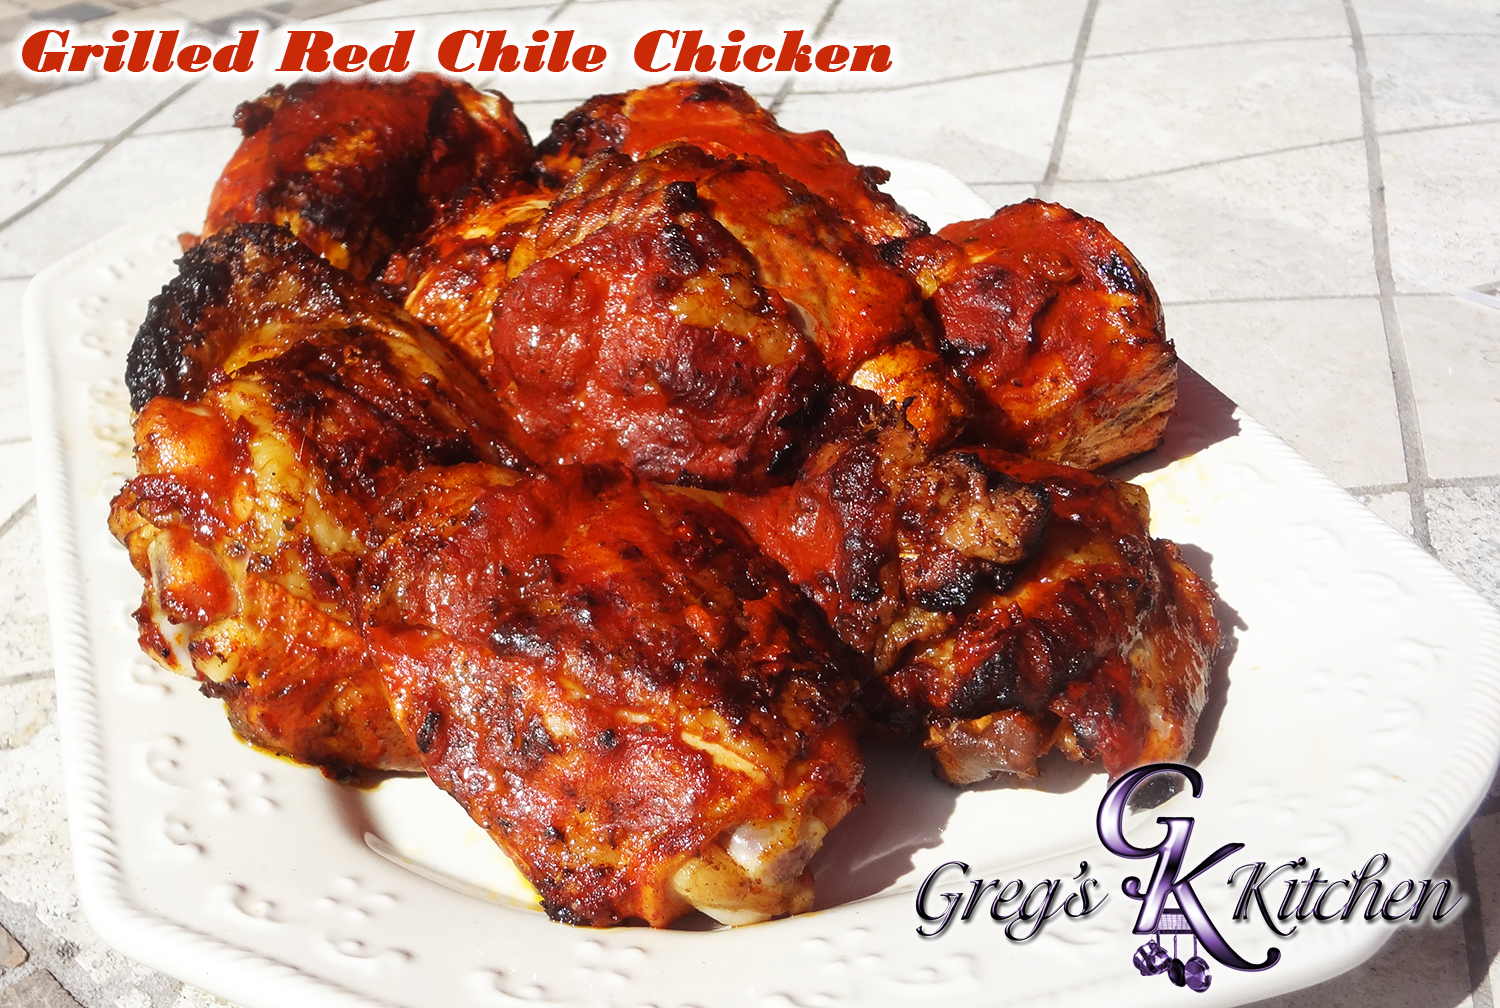 Grilled Red Chile Chicken